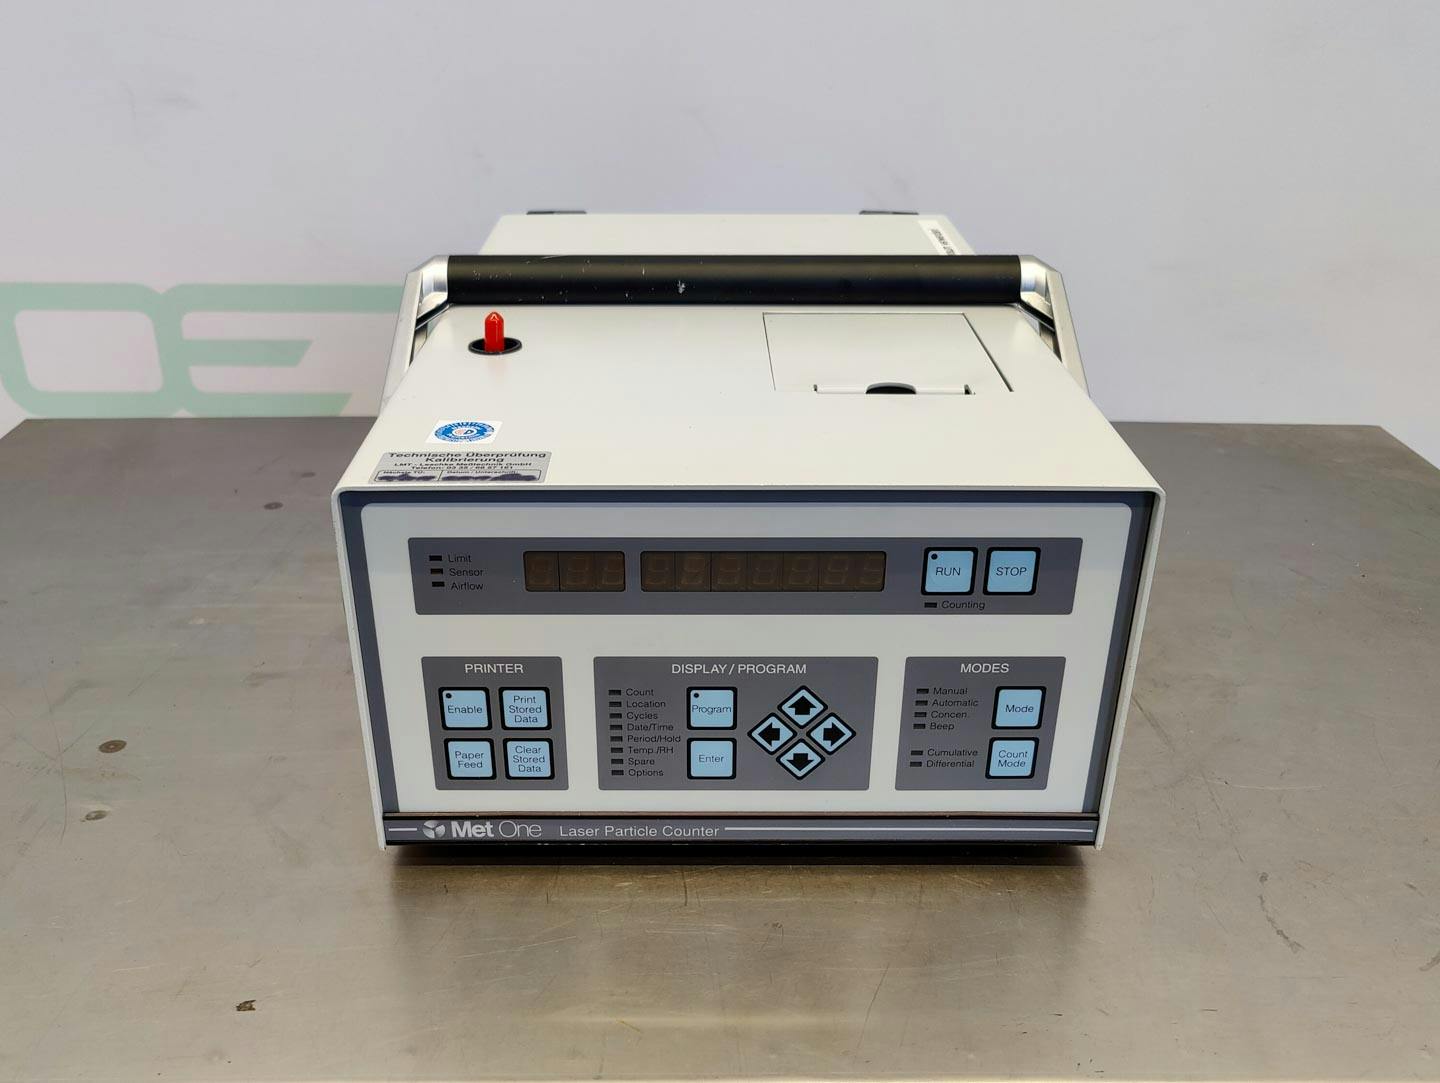 Met One A2408 "laser particle counter" - Miscellaneous